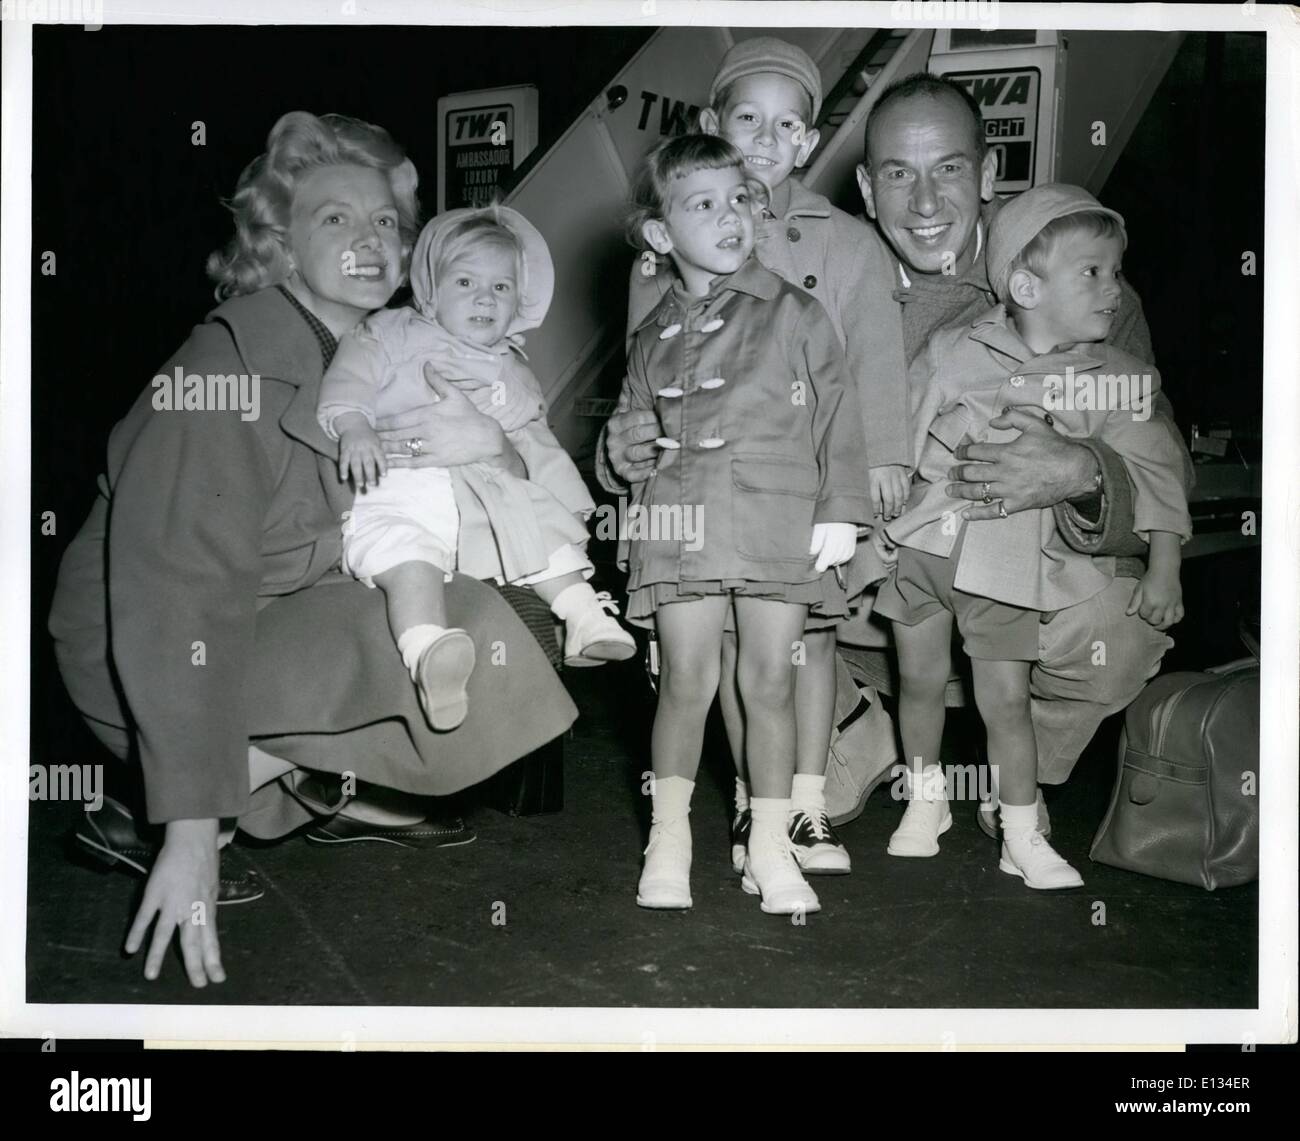 Feb. 26, 2012 - N.Y. International Airport, Nov. 2. Jose Ferrer, his songbird wife, Rosemary Clooney, and their children, left to right: Monsita, 1, Maria, 3, Miguel, 4 &frac12; and Gabriel, 2, Jetted into town via TWA from Los Angeles. They Plan to stay in New York for a while. The senior Ferrer will direct a broadway play. Stock Photo